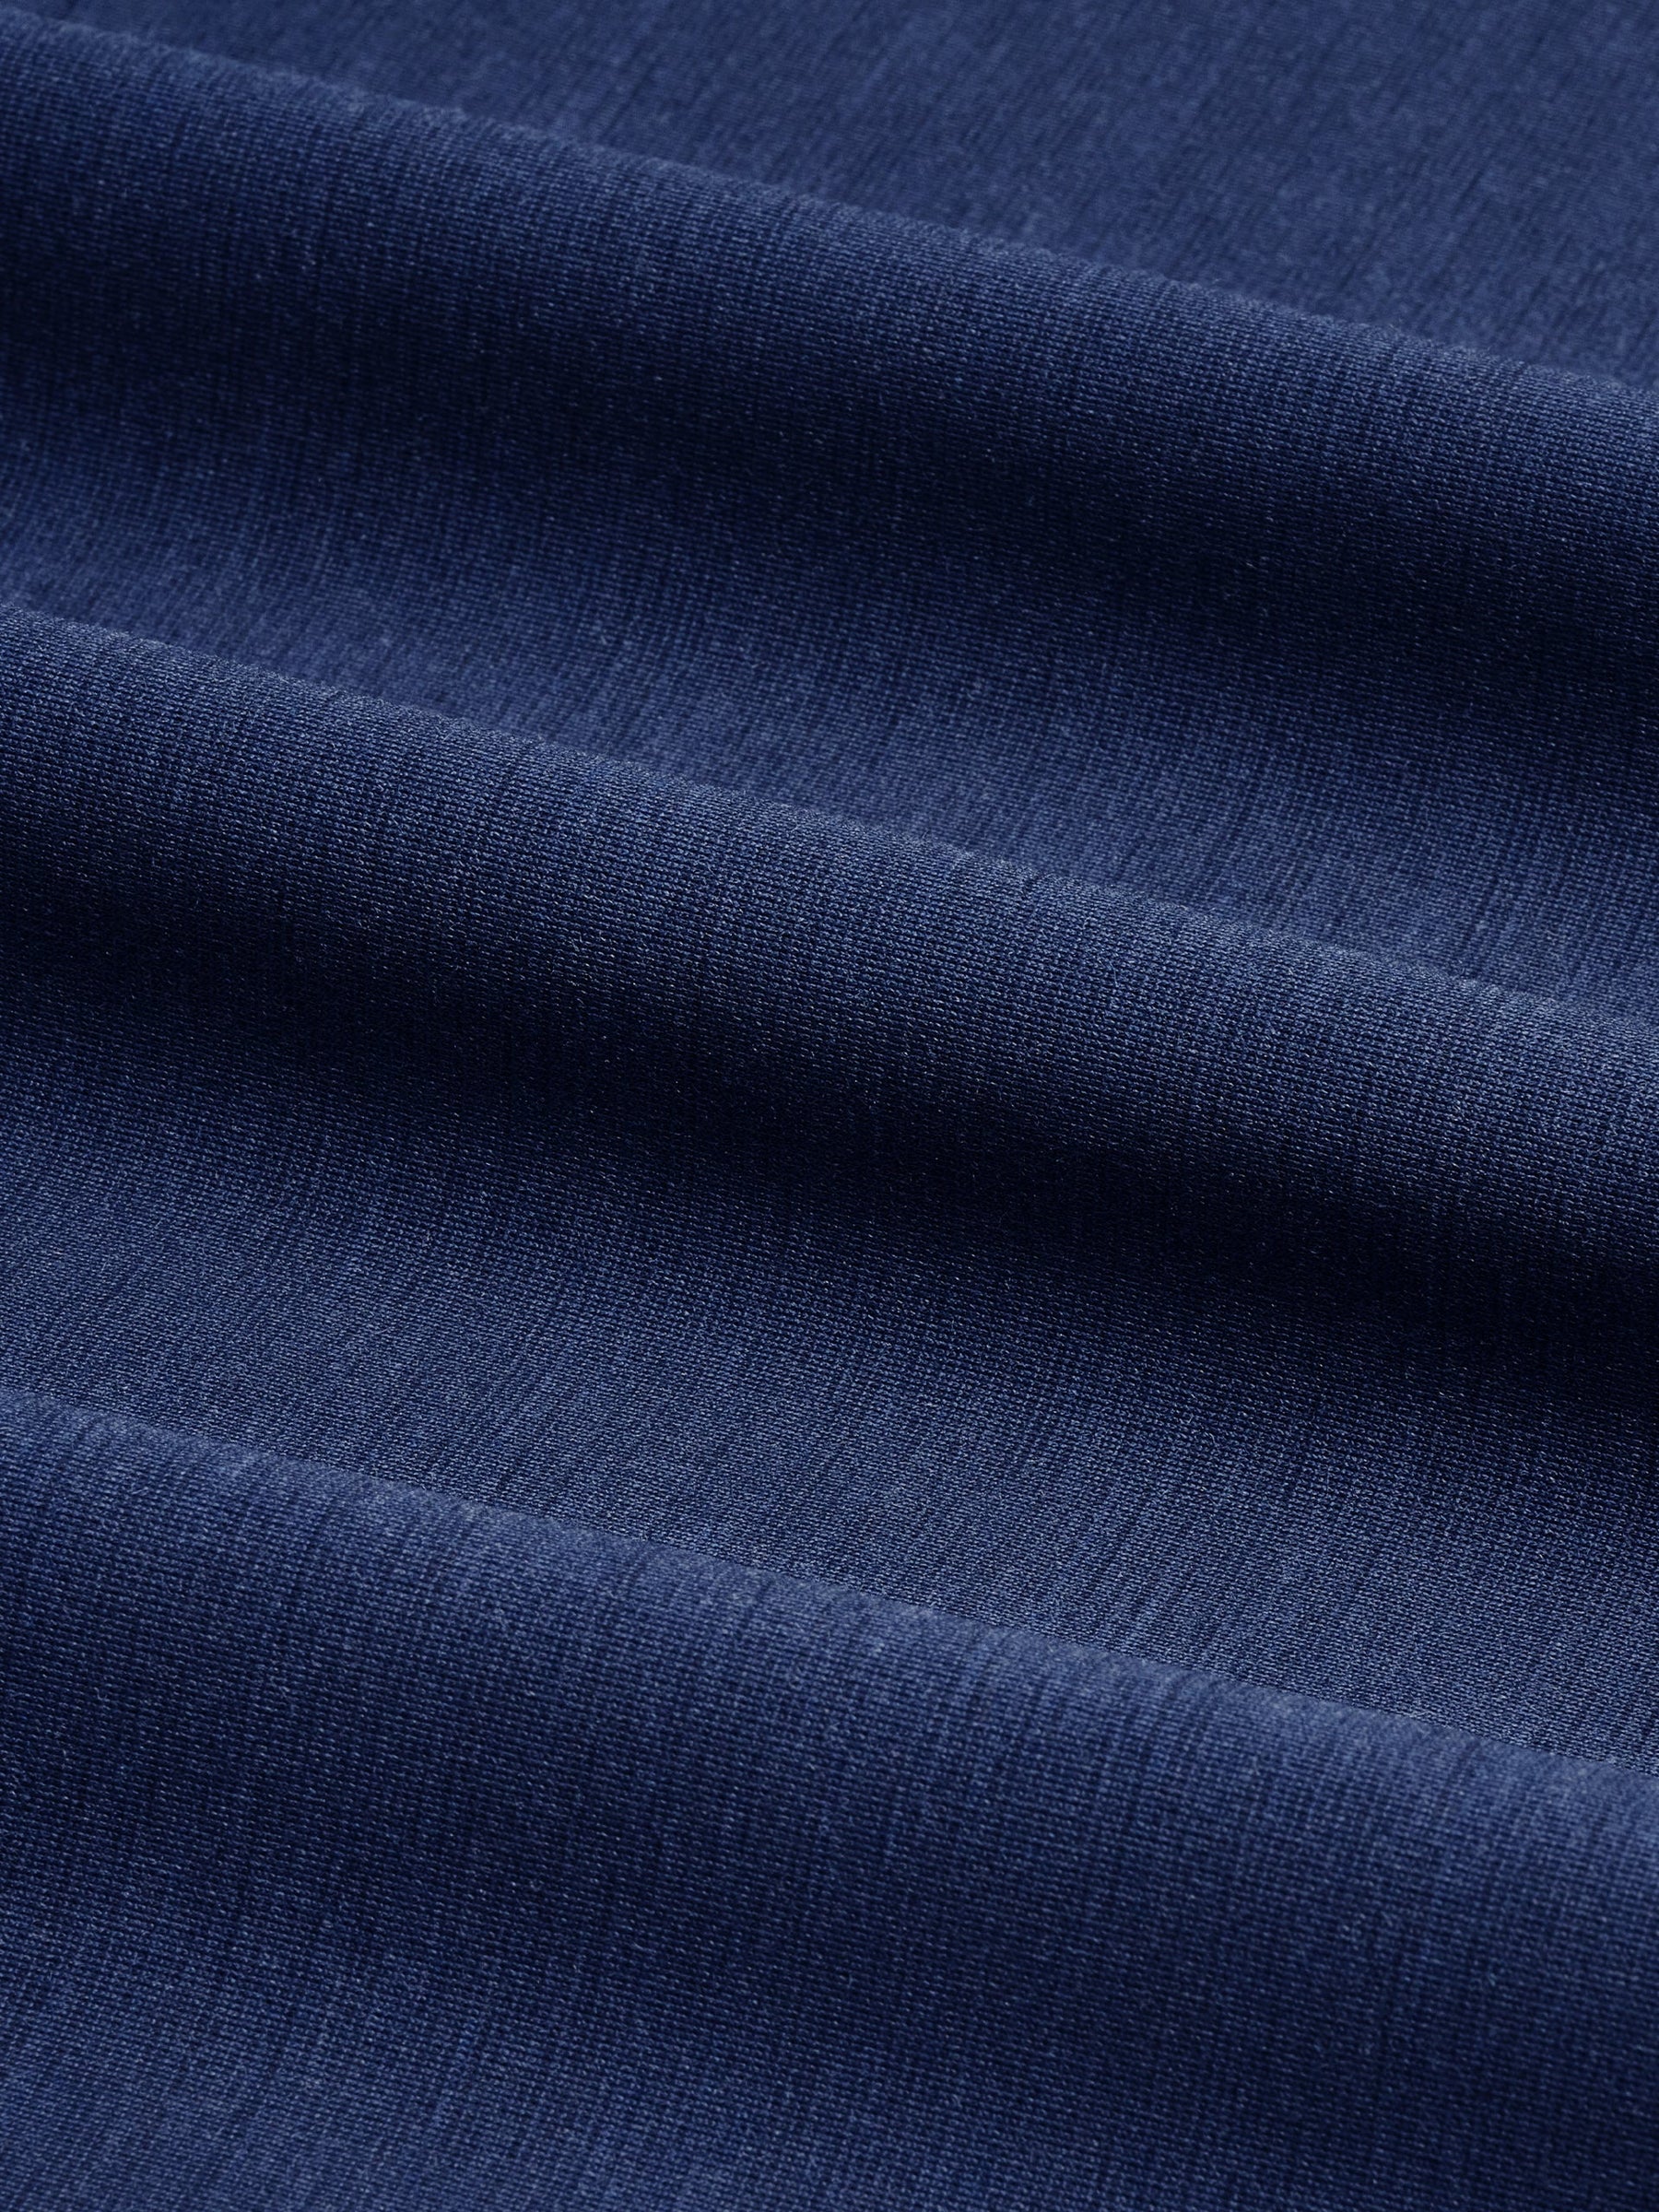 xPant 5.0 TechWool Limited Edition - Mid Blue